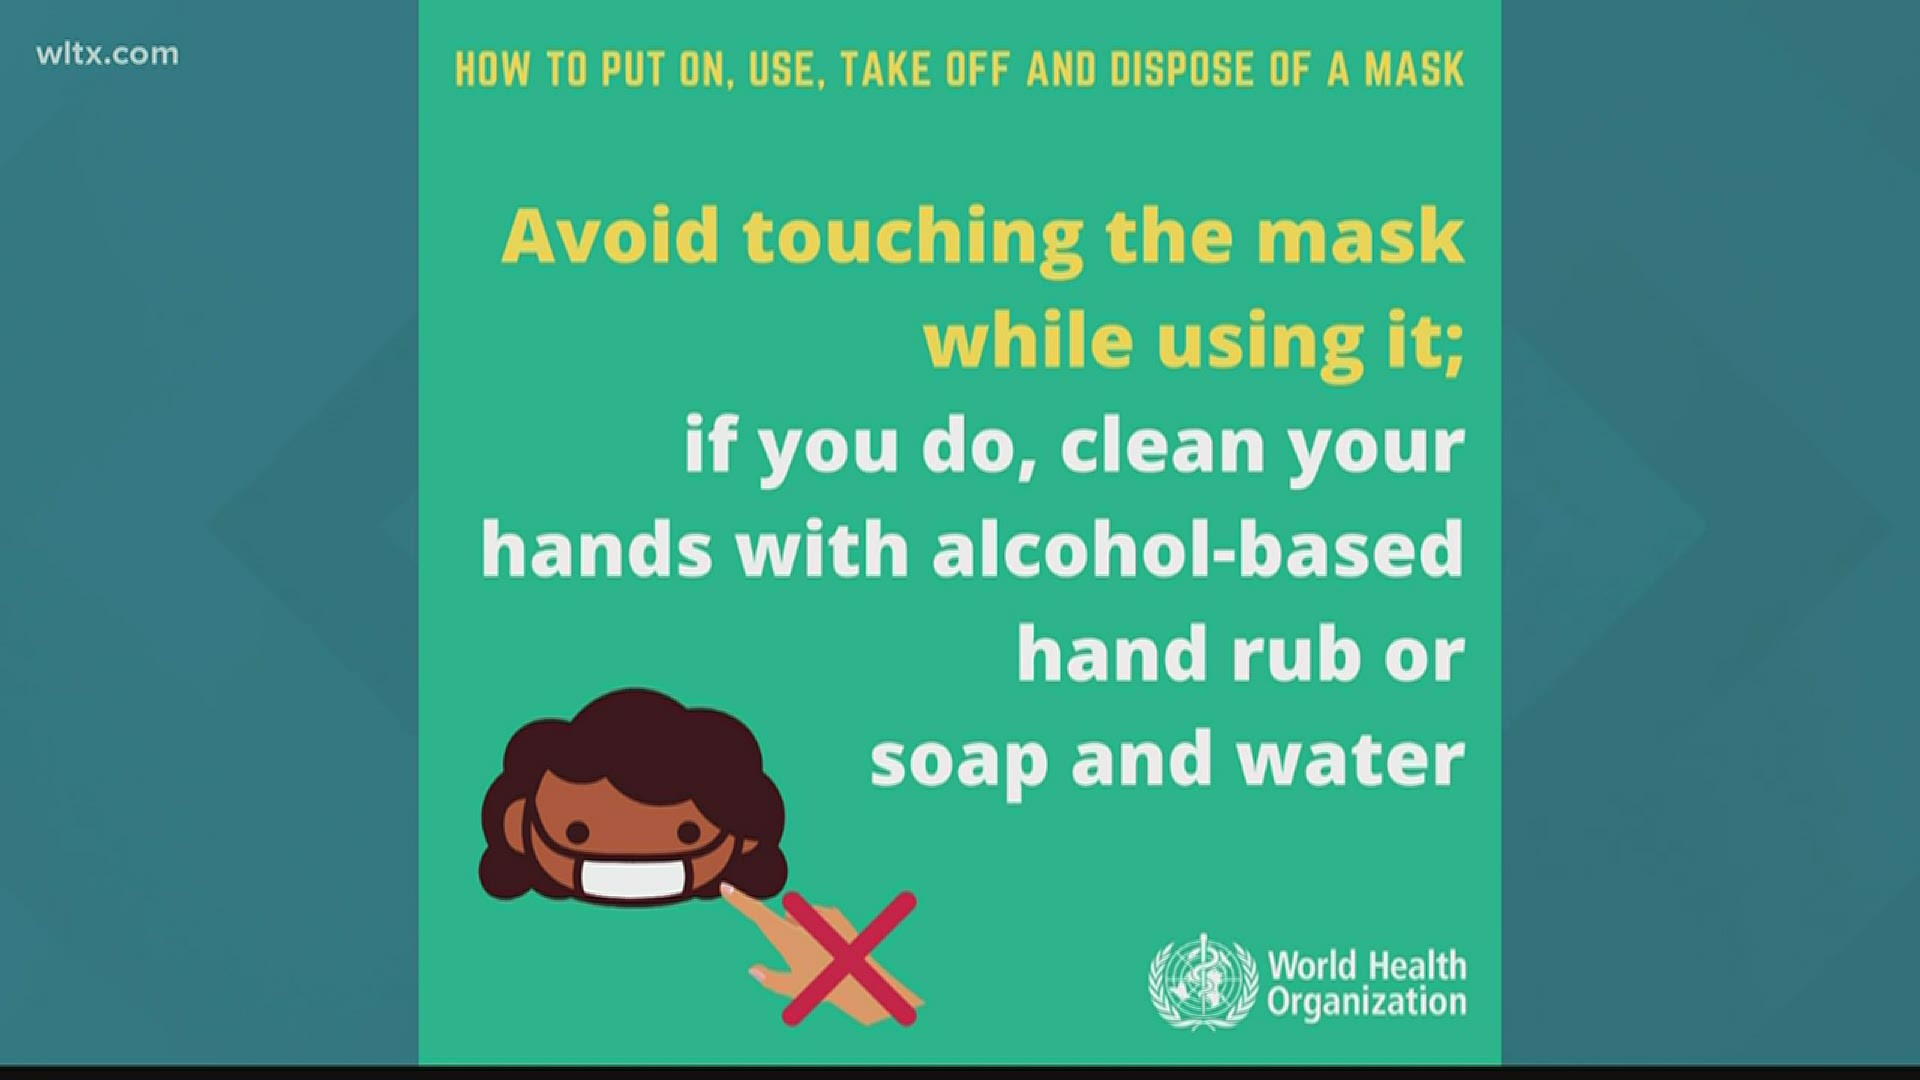 Thanks to new CDC guidelines, more people are wearing masks. Here are some common mistakes to avoid when wearing a face mask.